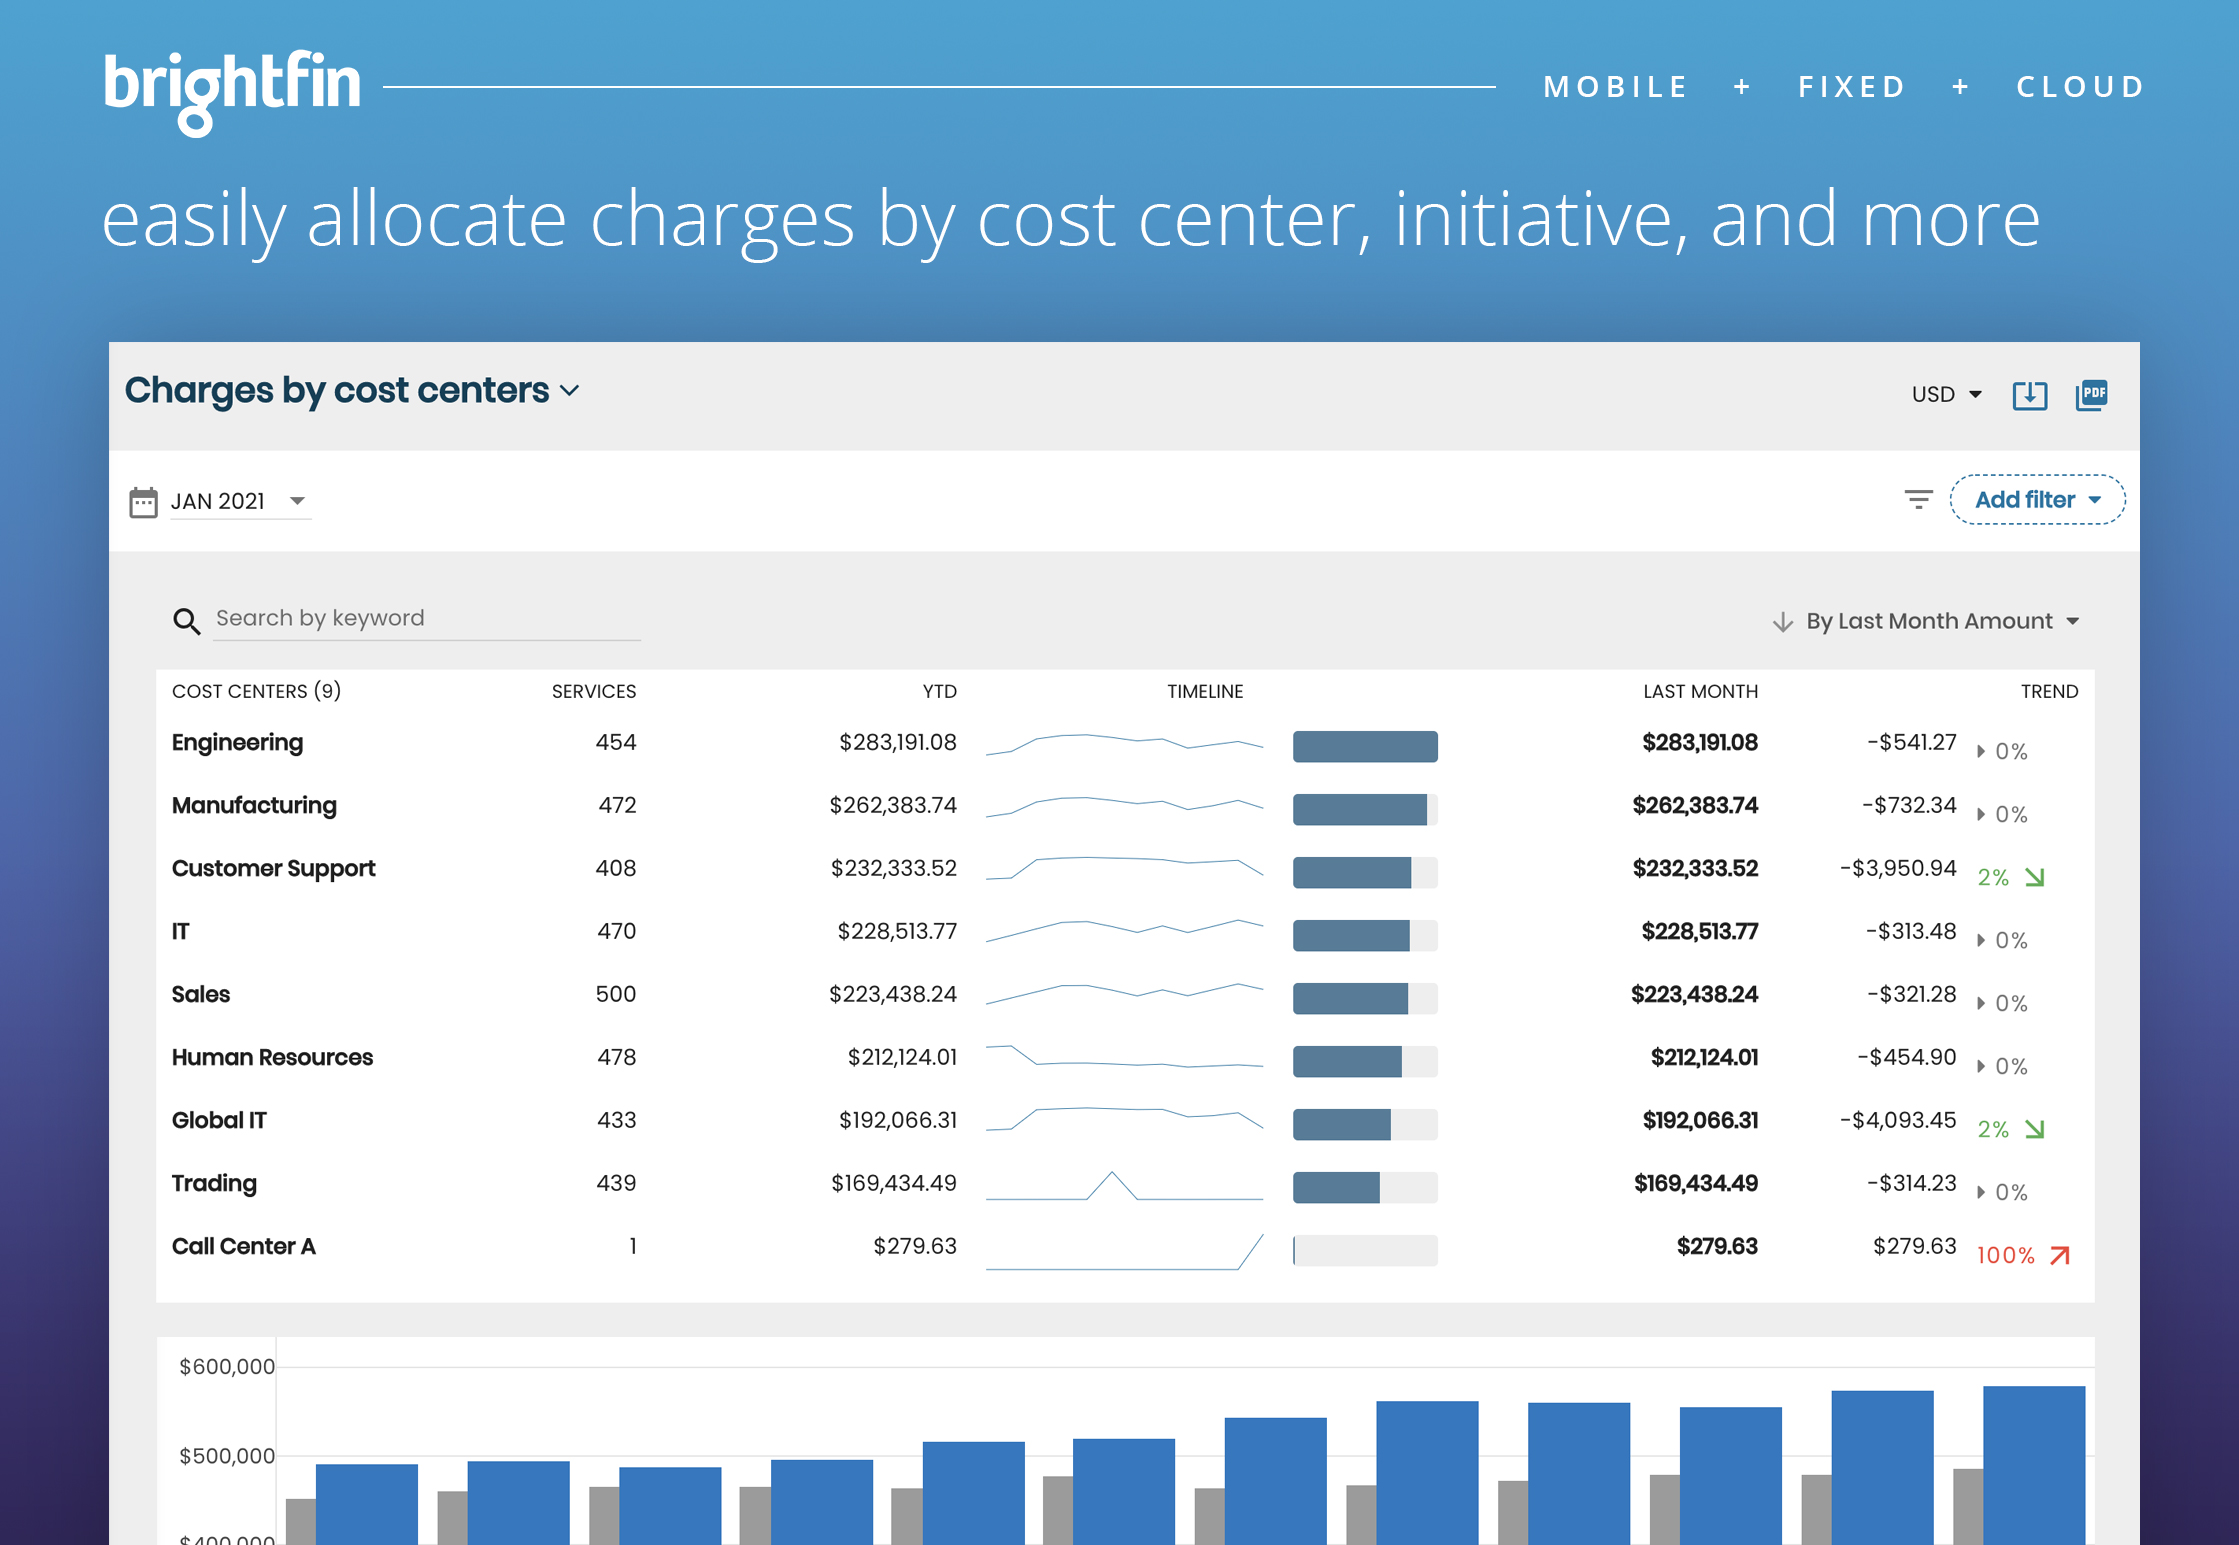 Easily allocate charges by cost center, initiative, and more